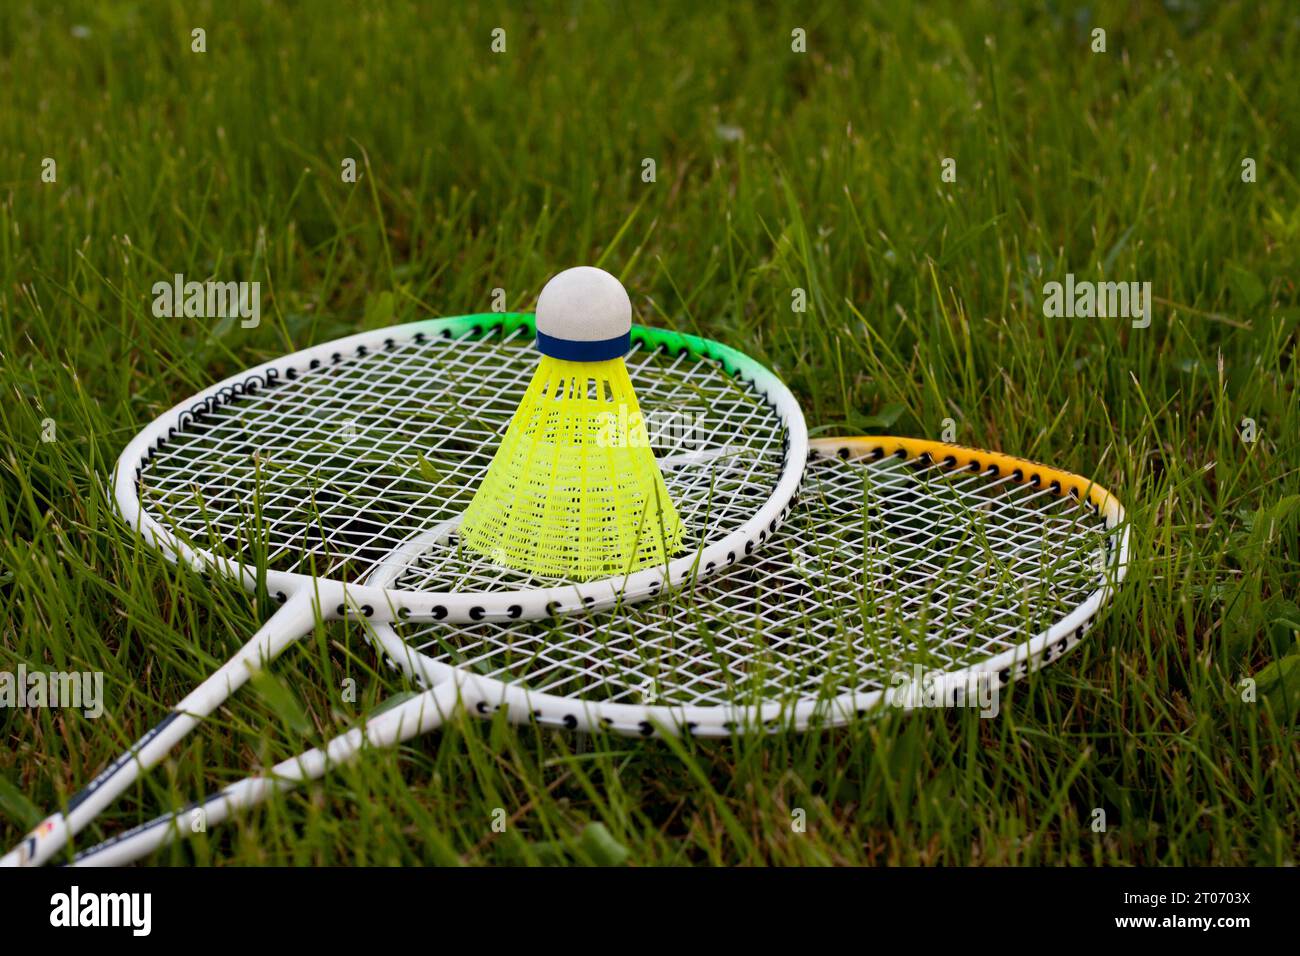 Badminton set yellow shuttlecock and rackets lying on green grass. Sports concept. Active game of badminton outdoors. Sport equipment. Stock Photo